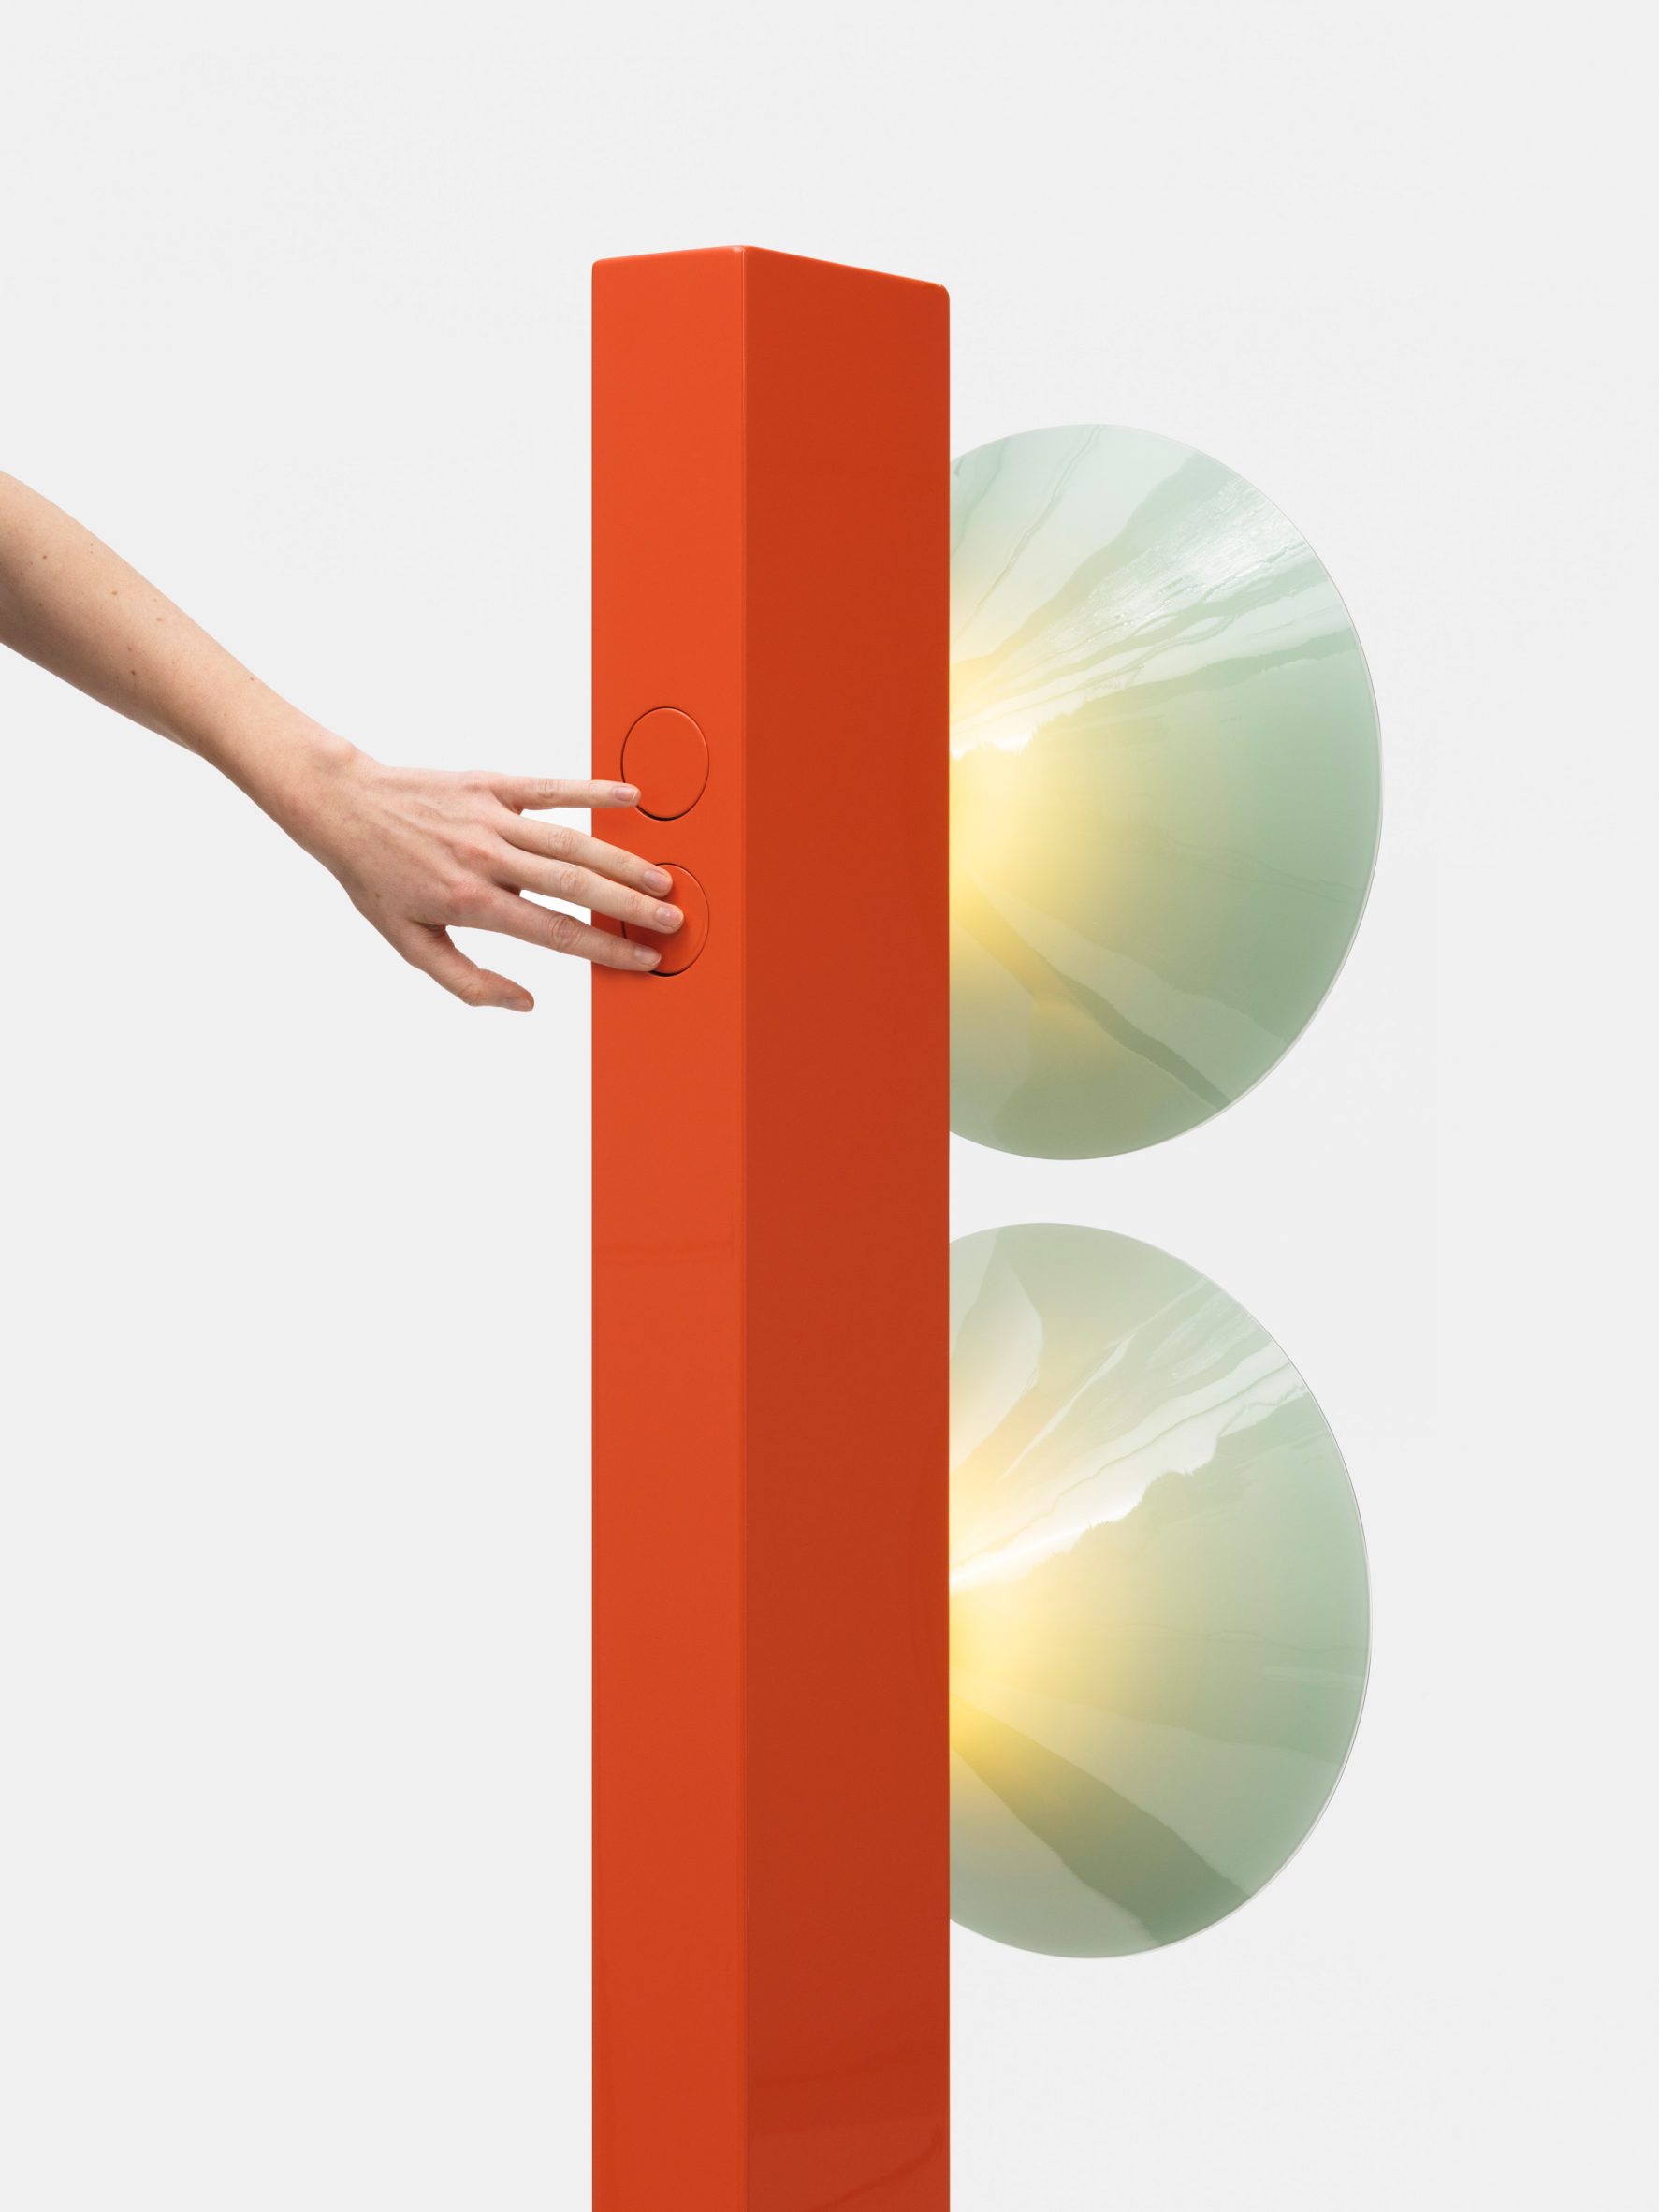 Signals floor lamp by Barber and Osgerby